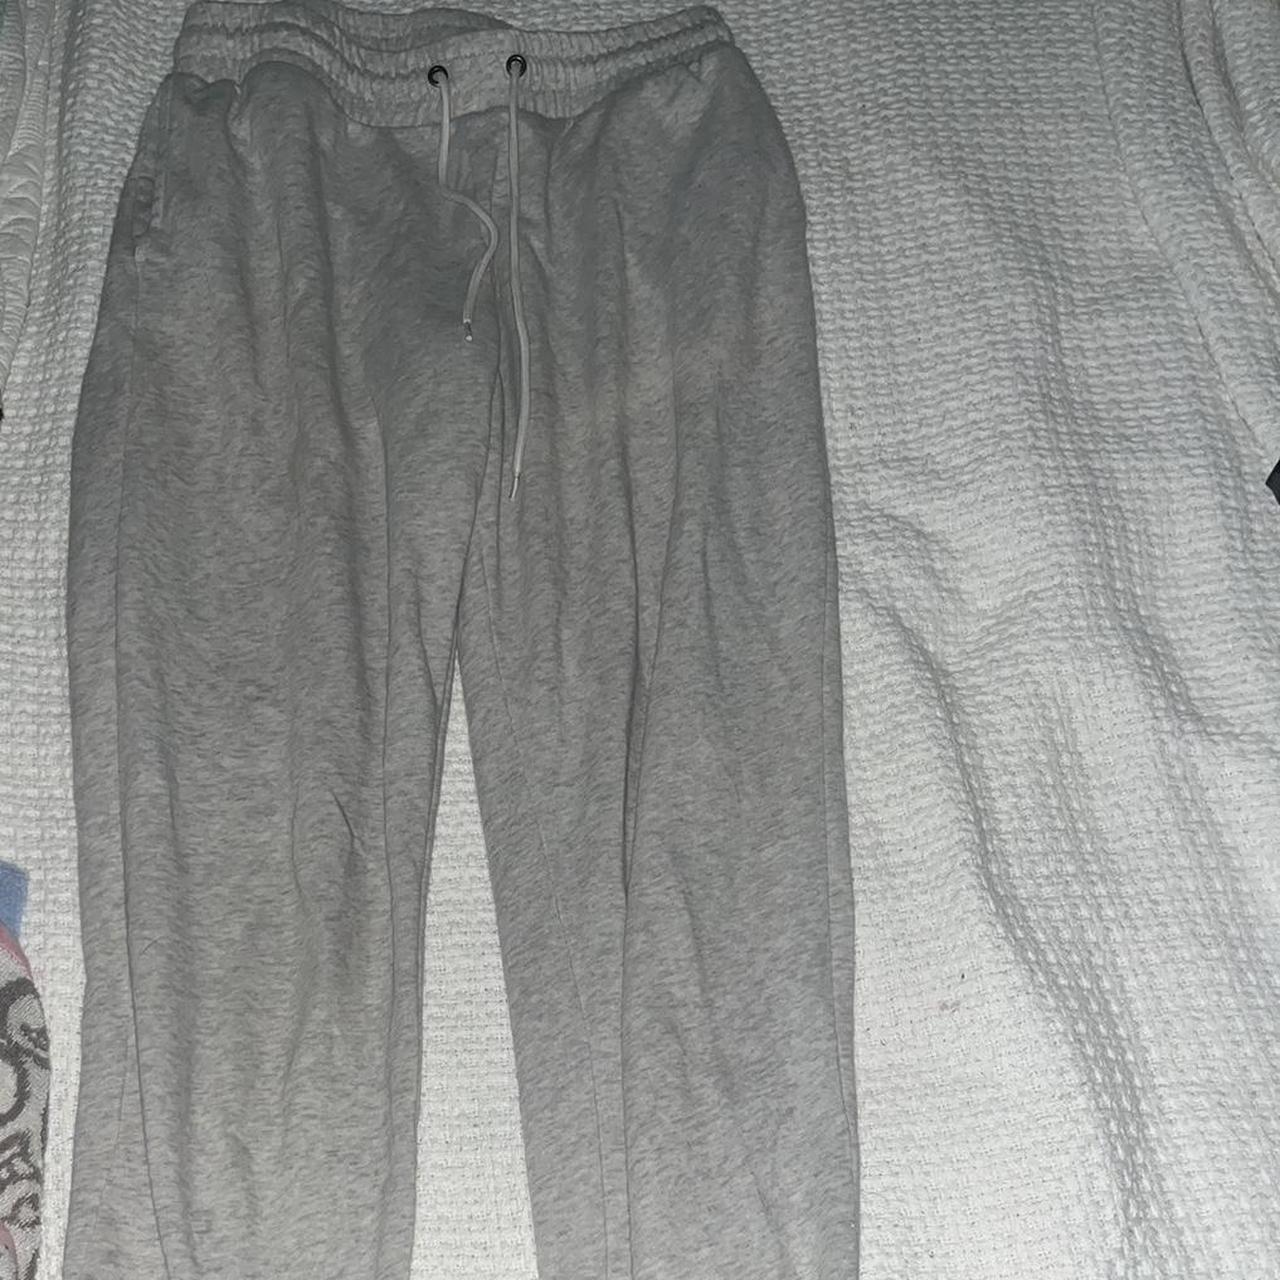 Grey sweats perfect for relaxation #relax #dayoff #cozy - Depop